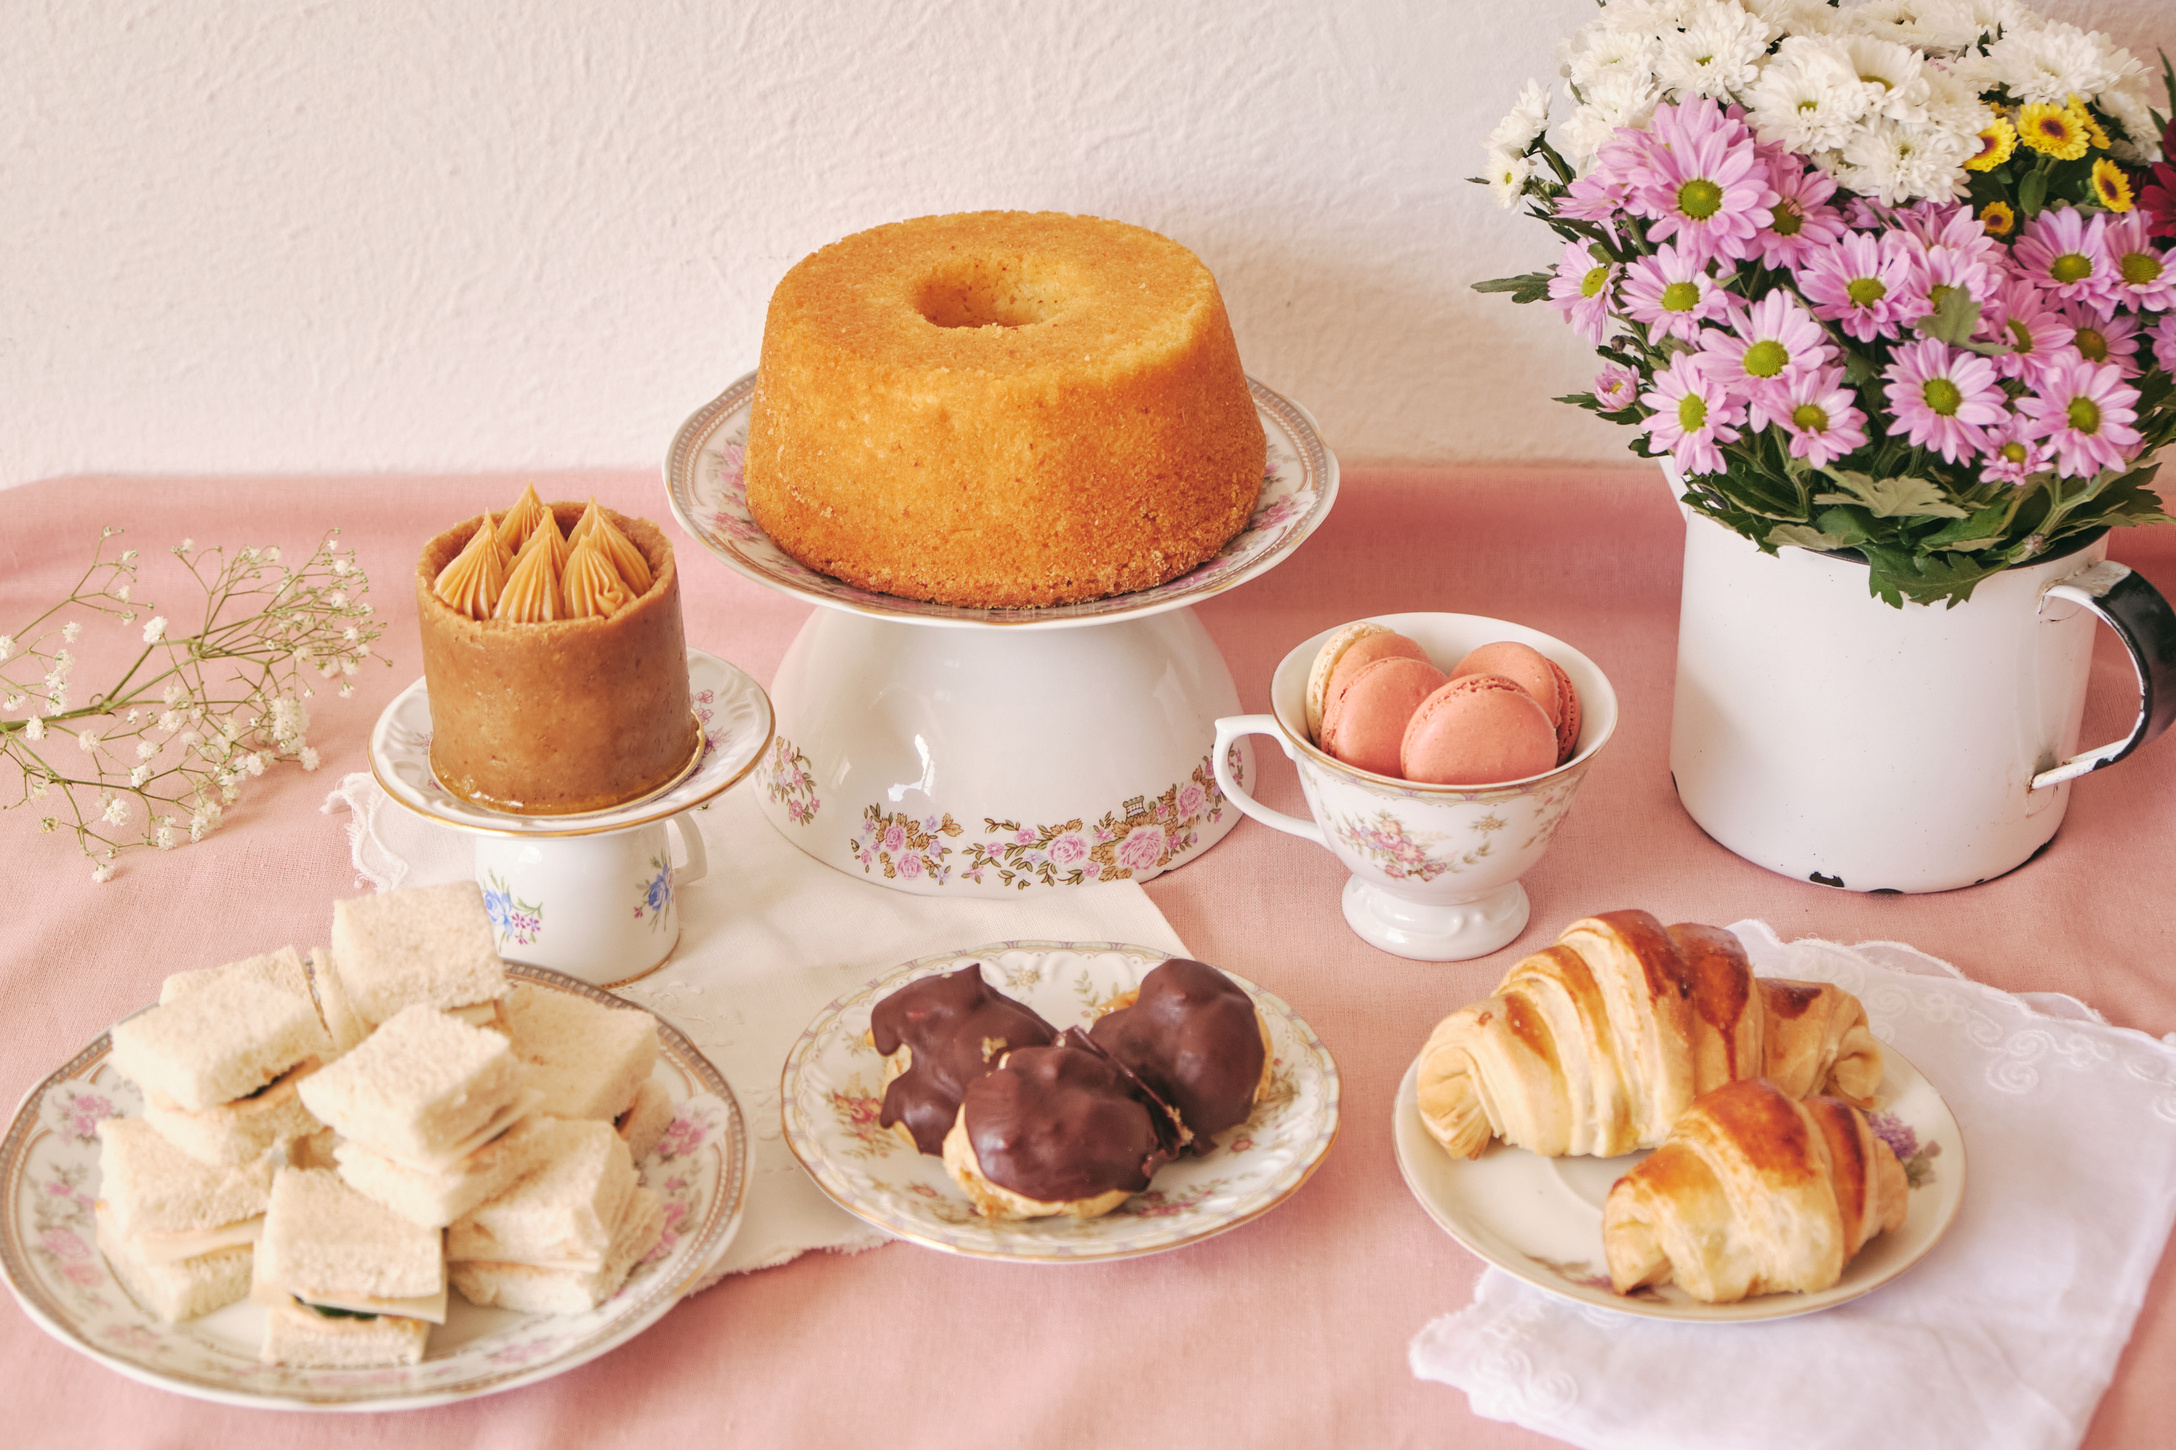 Assorted Pastries and Snacks for High Tea